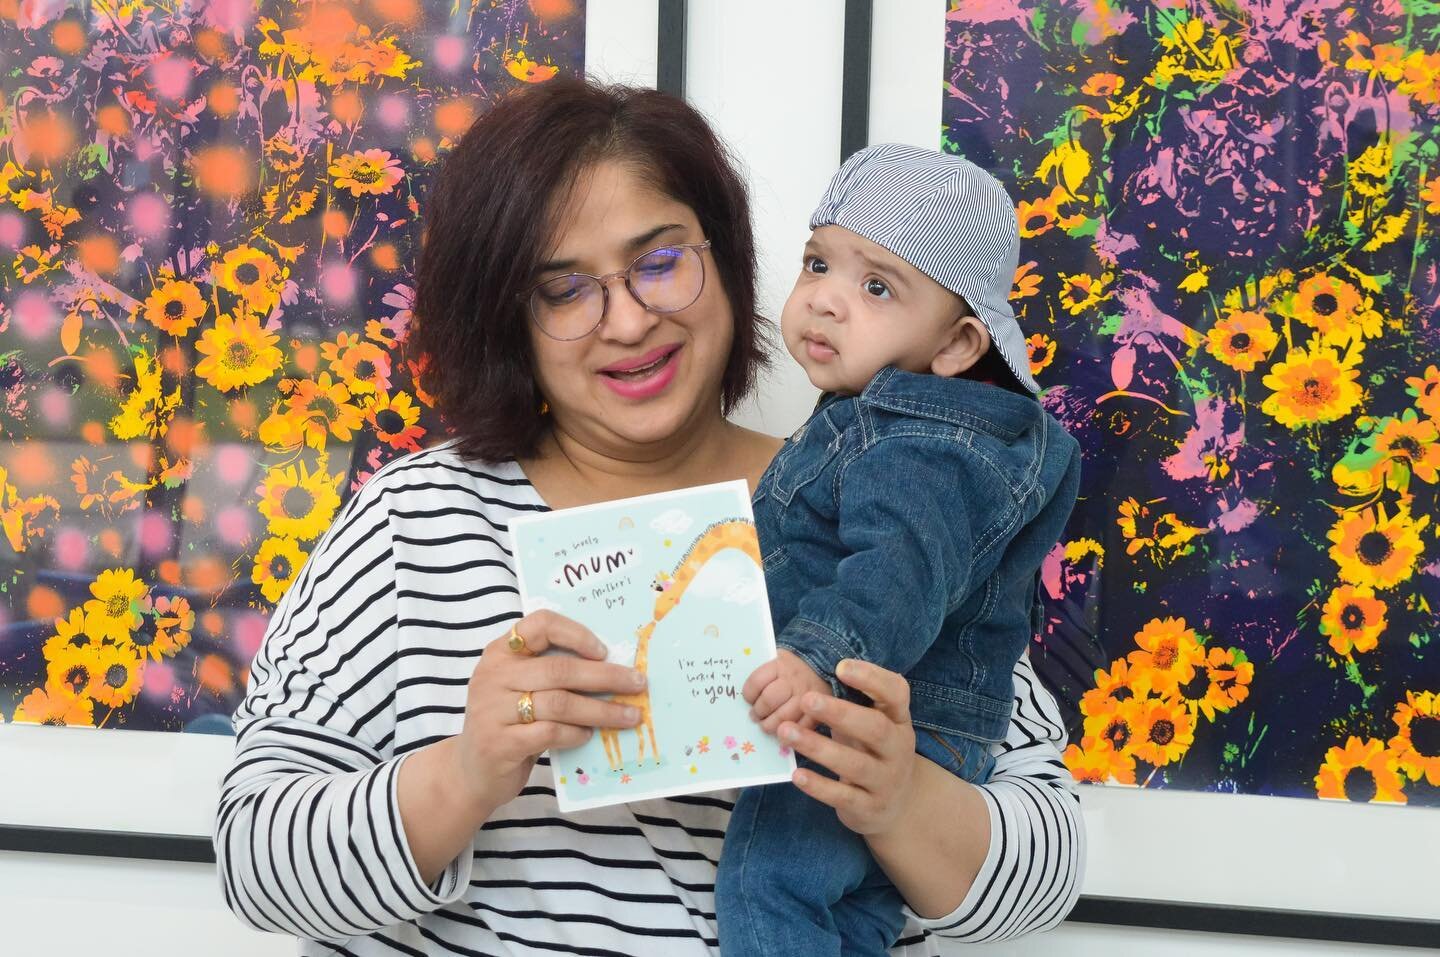 Happy Mother&rsquo;s Day to all the mums and mother-figures we have the pleasure of spending time with at Leicester Gallery. 

You are AWESOME! 🌟

Tag your fellow mum friends in the comments and let them know how awesome they are 🤩

#leicestergalle